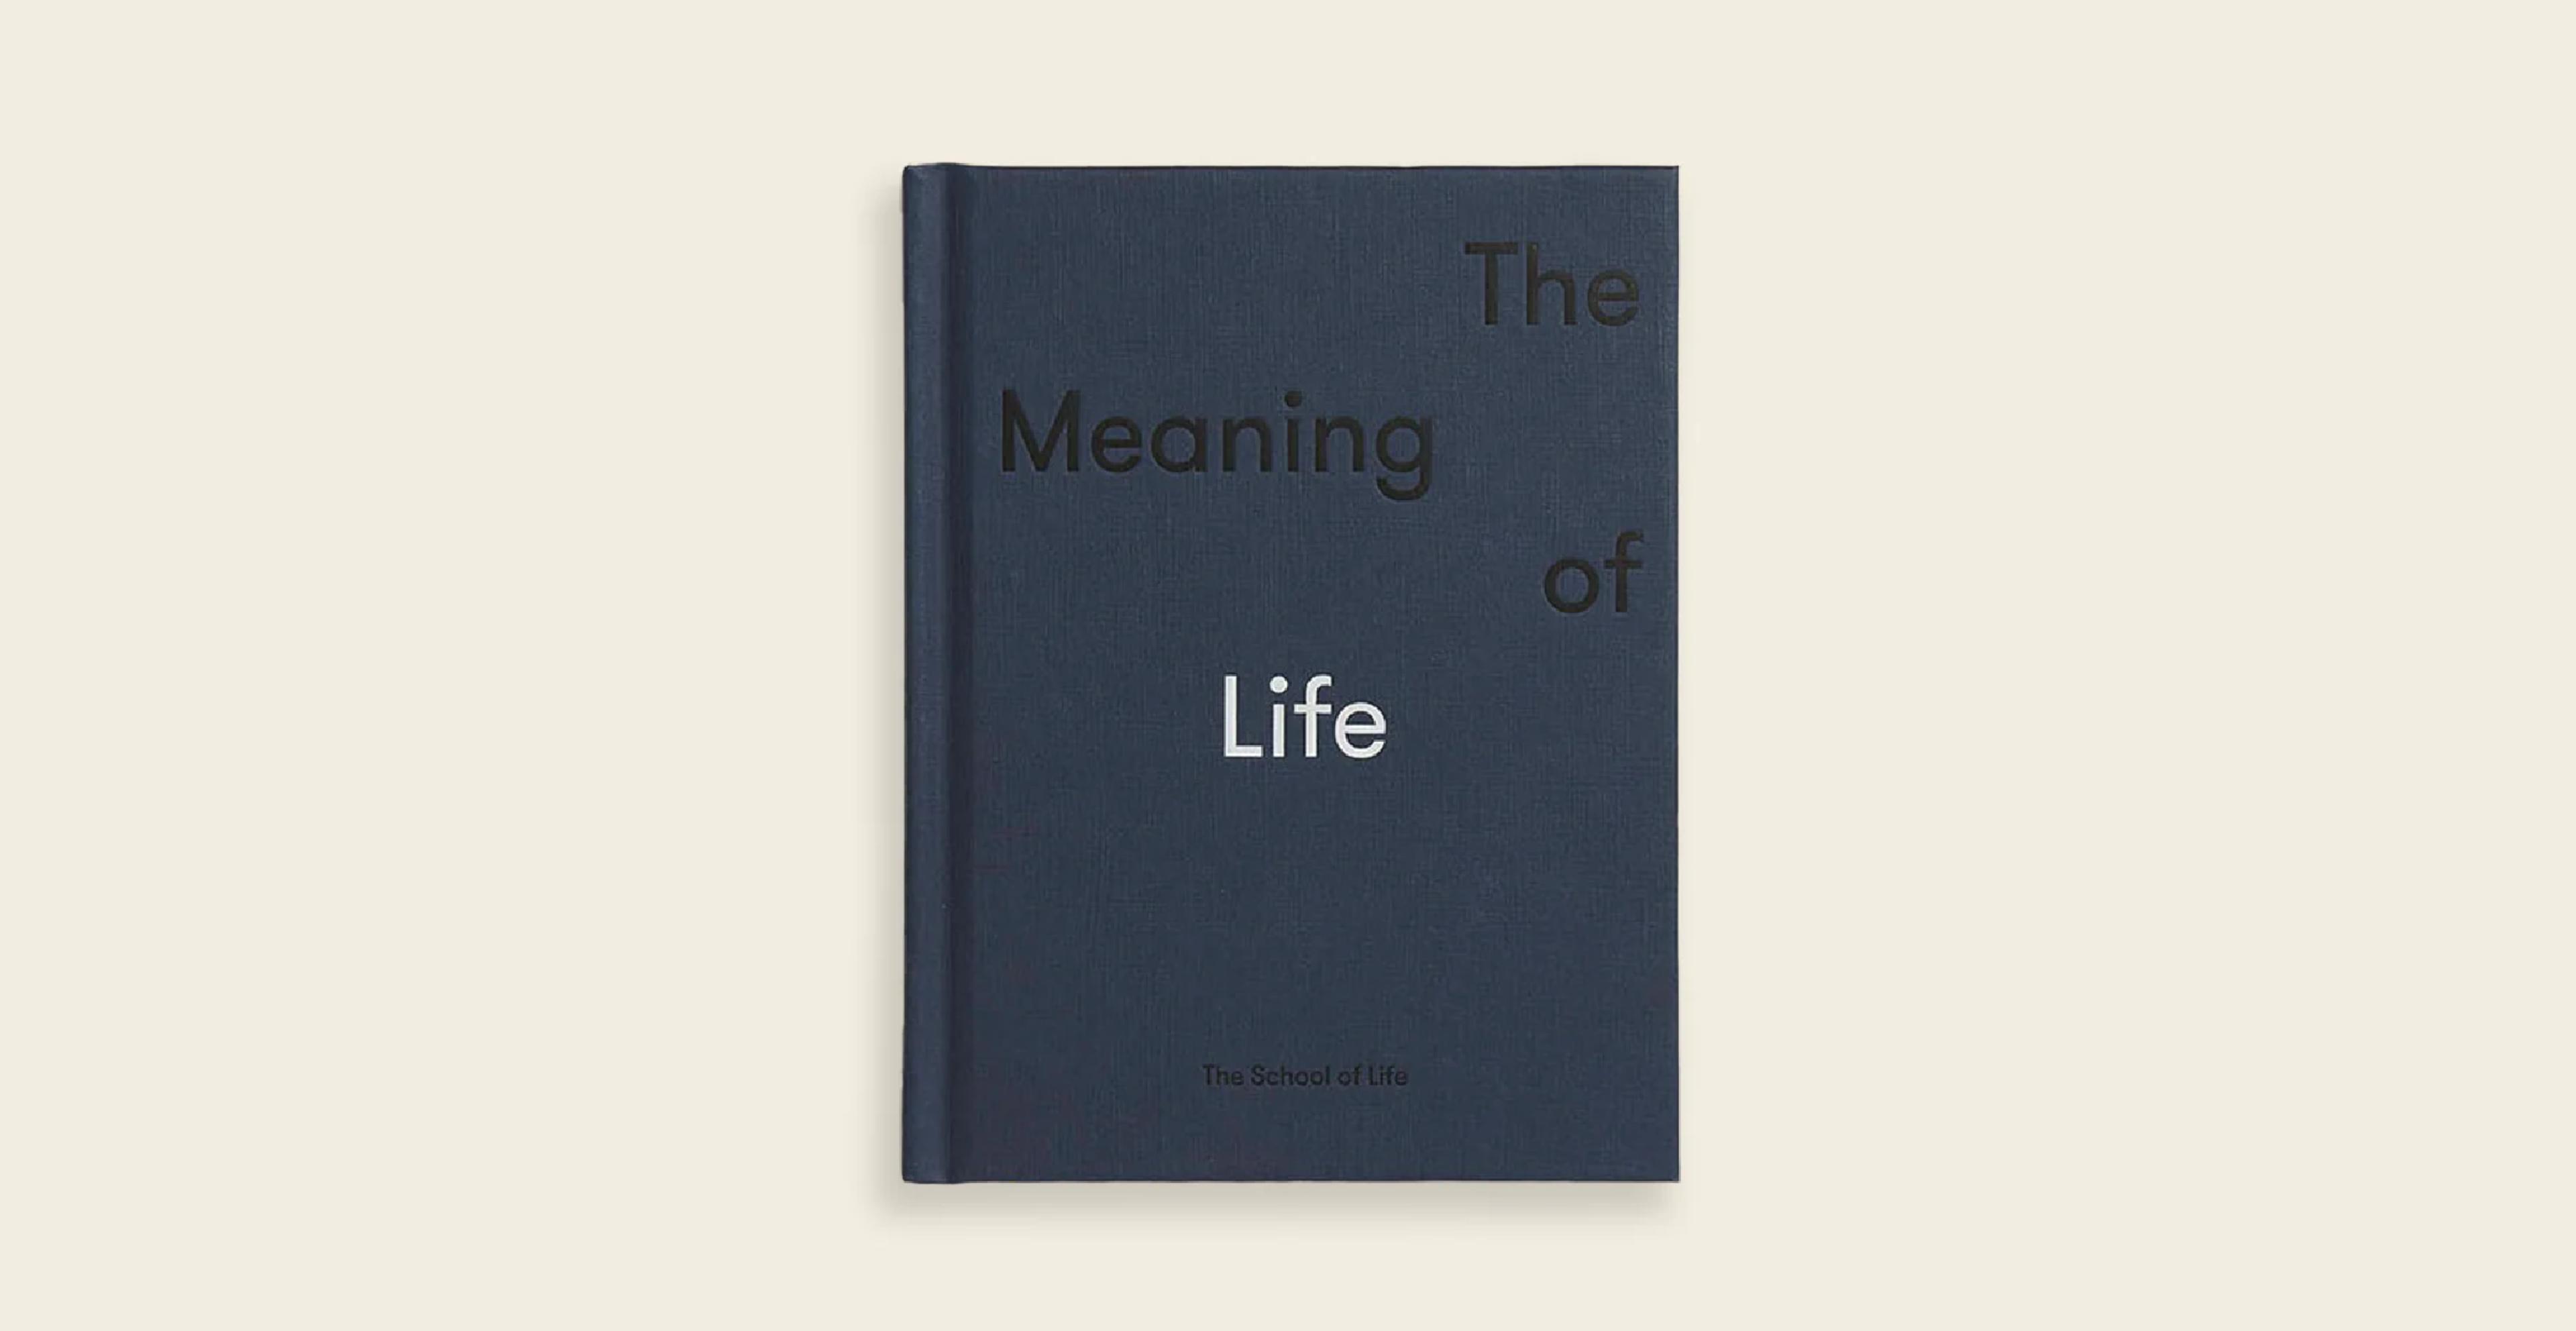 The Meaning of Life from The School of Life